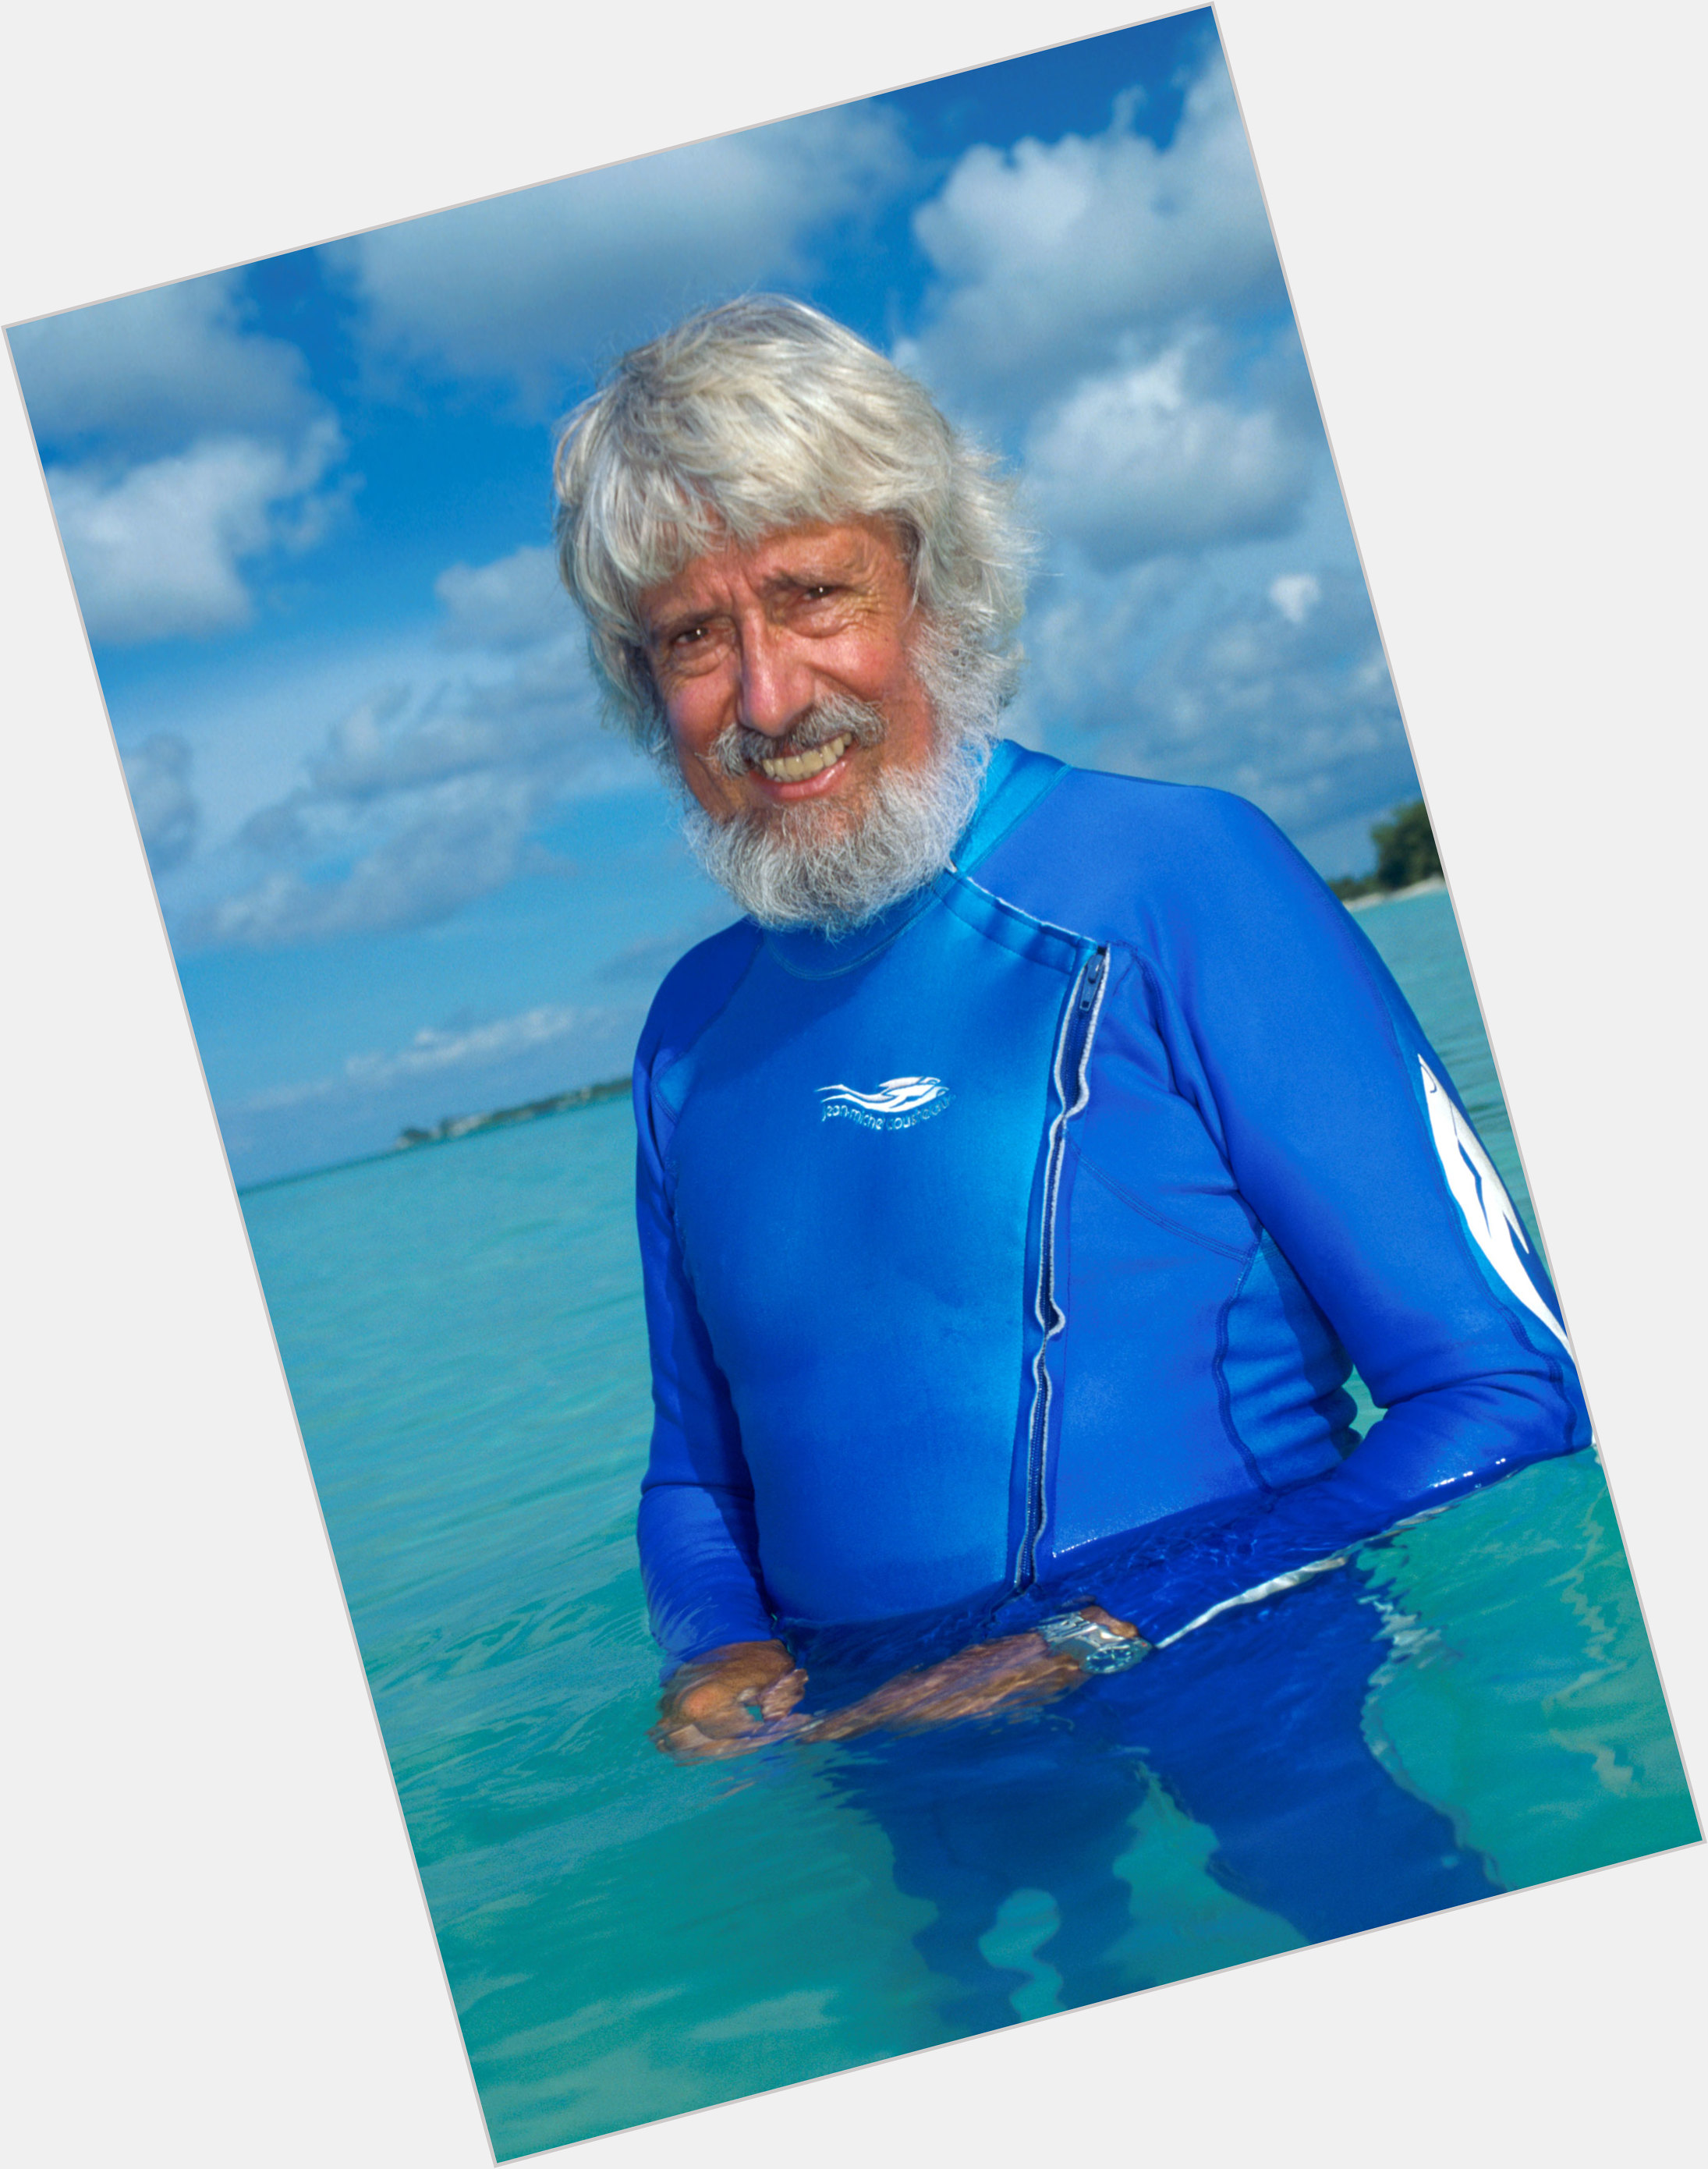 Jean Michel Cousteau Athletic body,  grey hair & hairstyles